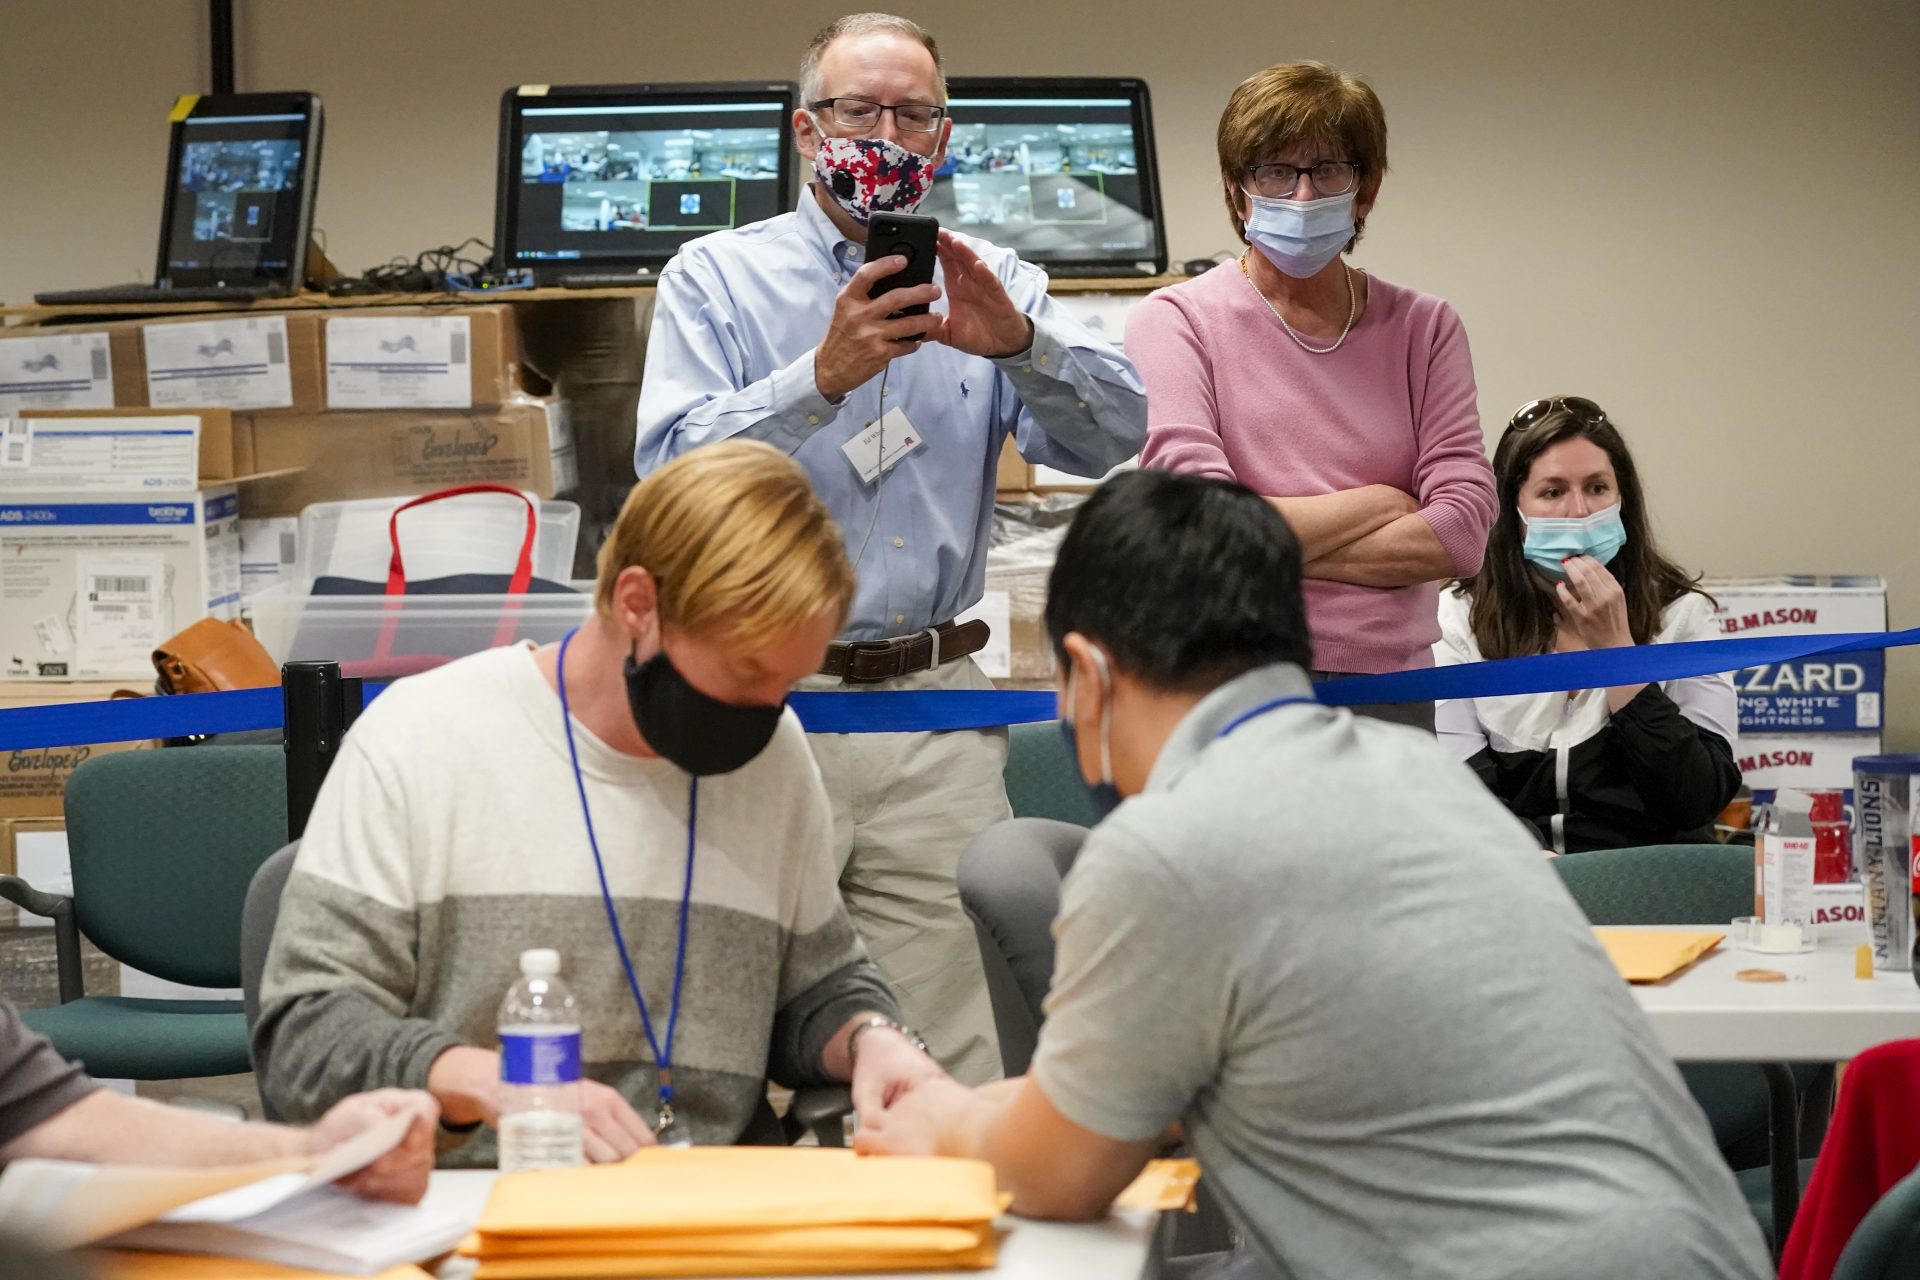 Republican canvas observer Ed White, center, and Democratic canvas observer Janne Kelhart, watch as Lehigh County workers count ballots as vote counting in the general election continues, Friday, Nov. 6, 2020, in Allentown, Pa.